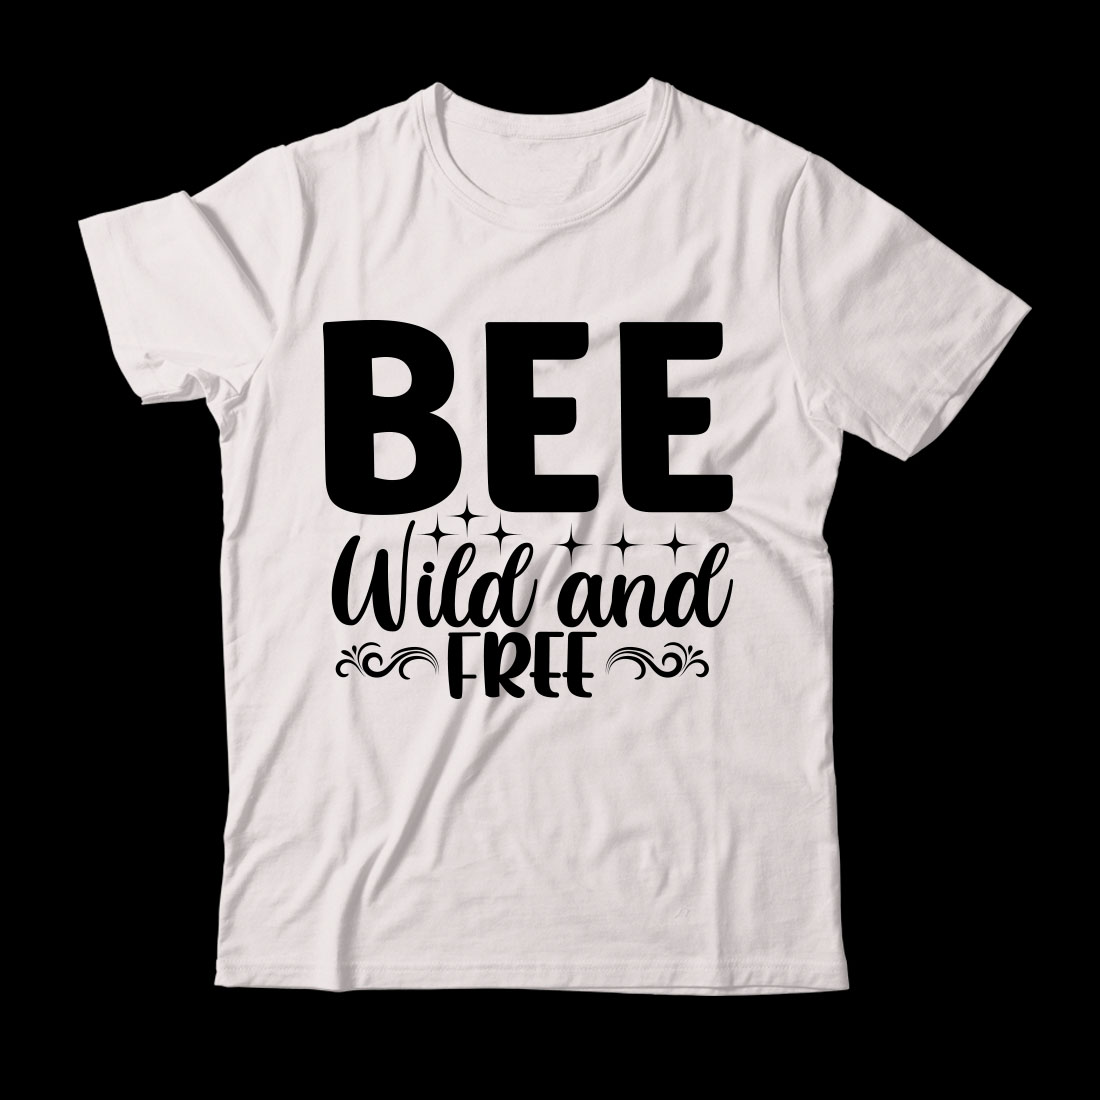 White t - shirt that says bee wild and free.